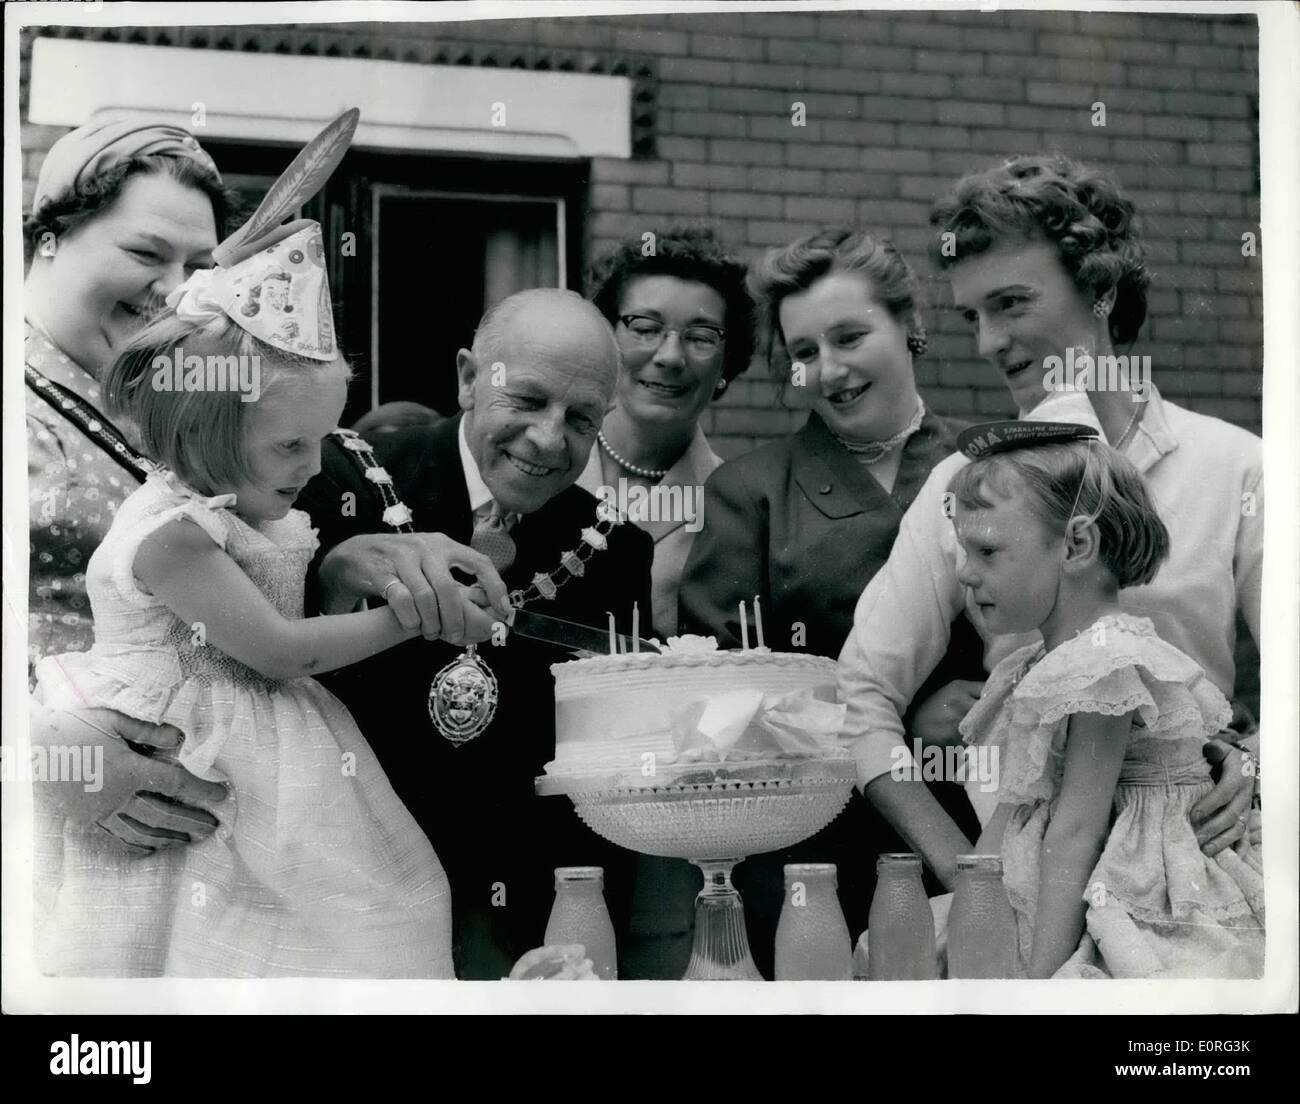 Aug. 08, 1959 - Little Ann's Rescue Party: There were four V.I.P. guests at Ann Culverwell's fourth birthday party - but for them there would not have been a party. Seven weeks ago Ann fell into a cannal near her home in Raleigh-street, Stretford, near Manchester. Her four-year-old friend, Madeline Murphy, raced 100 yards to tell her mother, a neighbour of the Culverwells., Then, with two other neighbours holding on to her legs, Mrs. Murphy hung head down in the water and fished out Ann. Little Ann's mother was a grateful that she organised a street birthday party Stock Photo